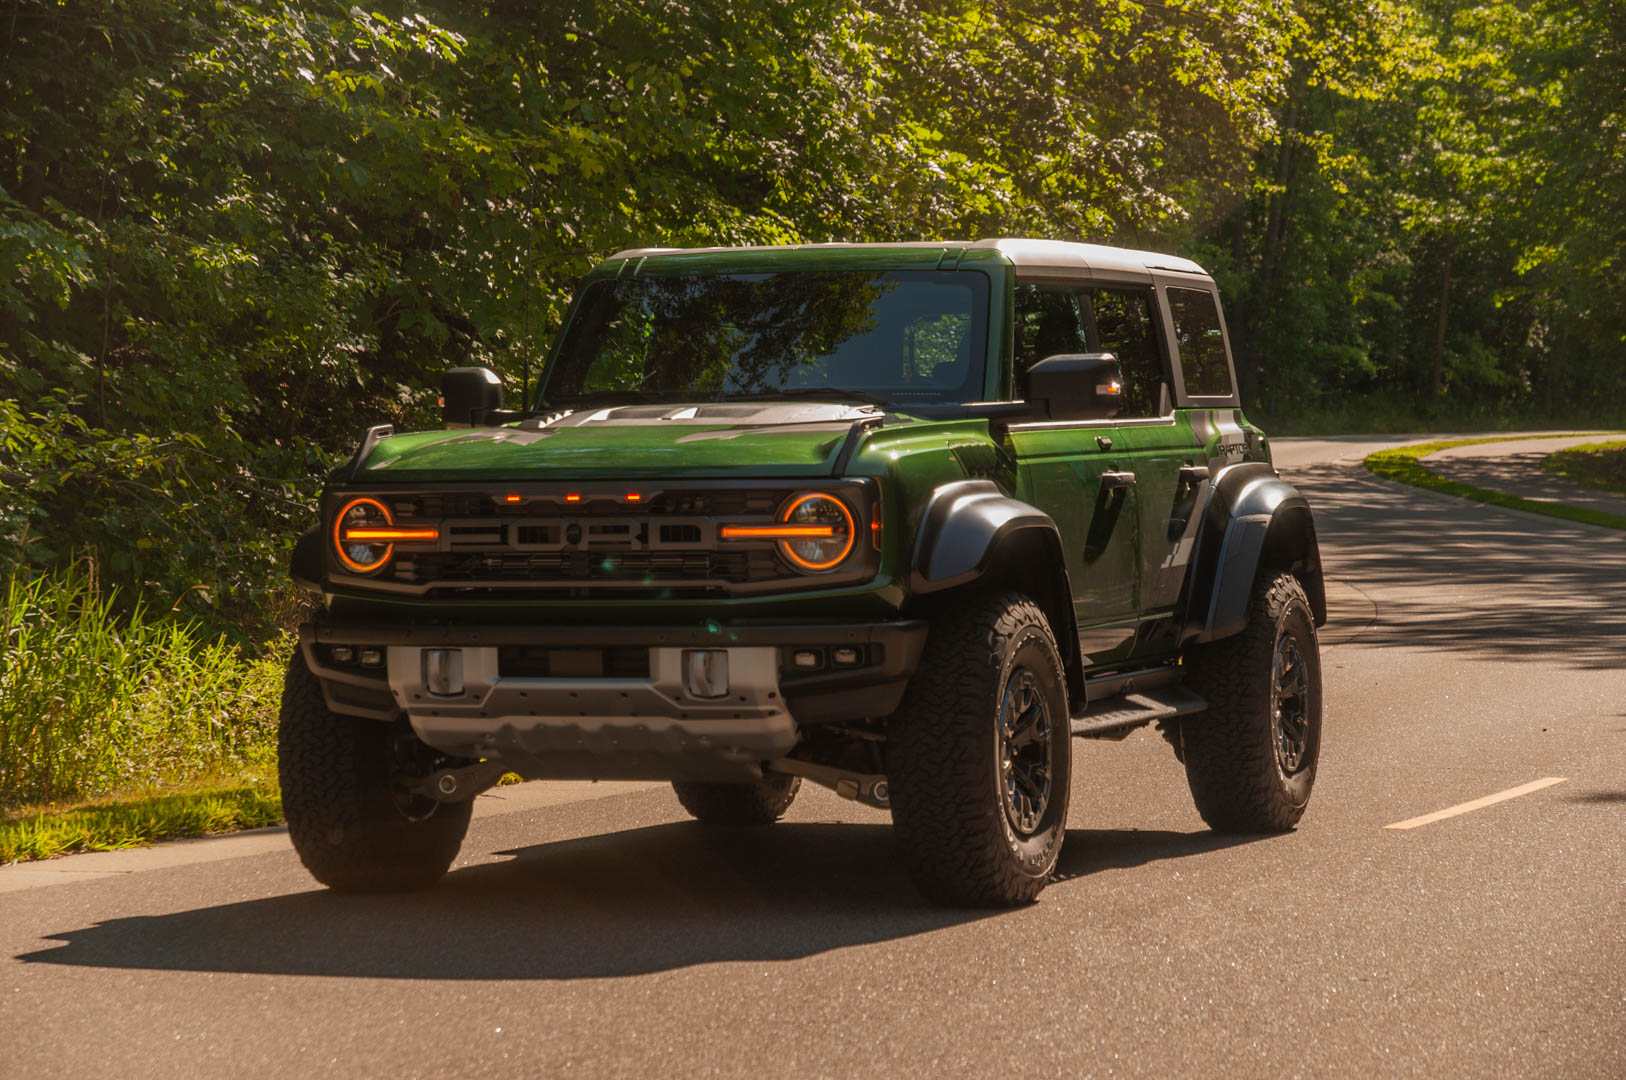 Test drive: 2022 Ford Bronco Raptor delivers Tonka Truck experience